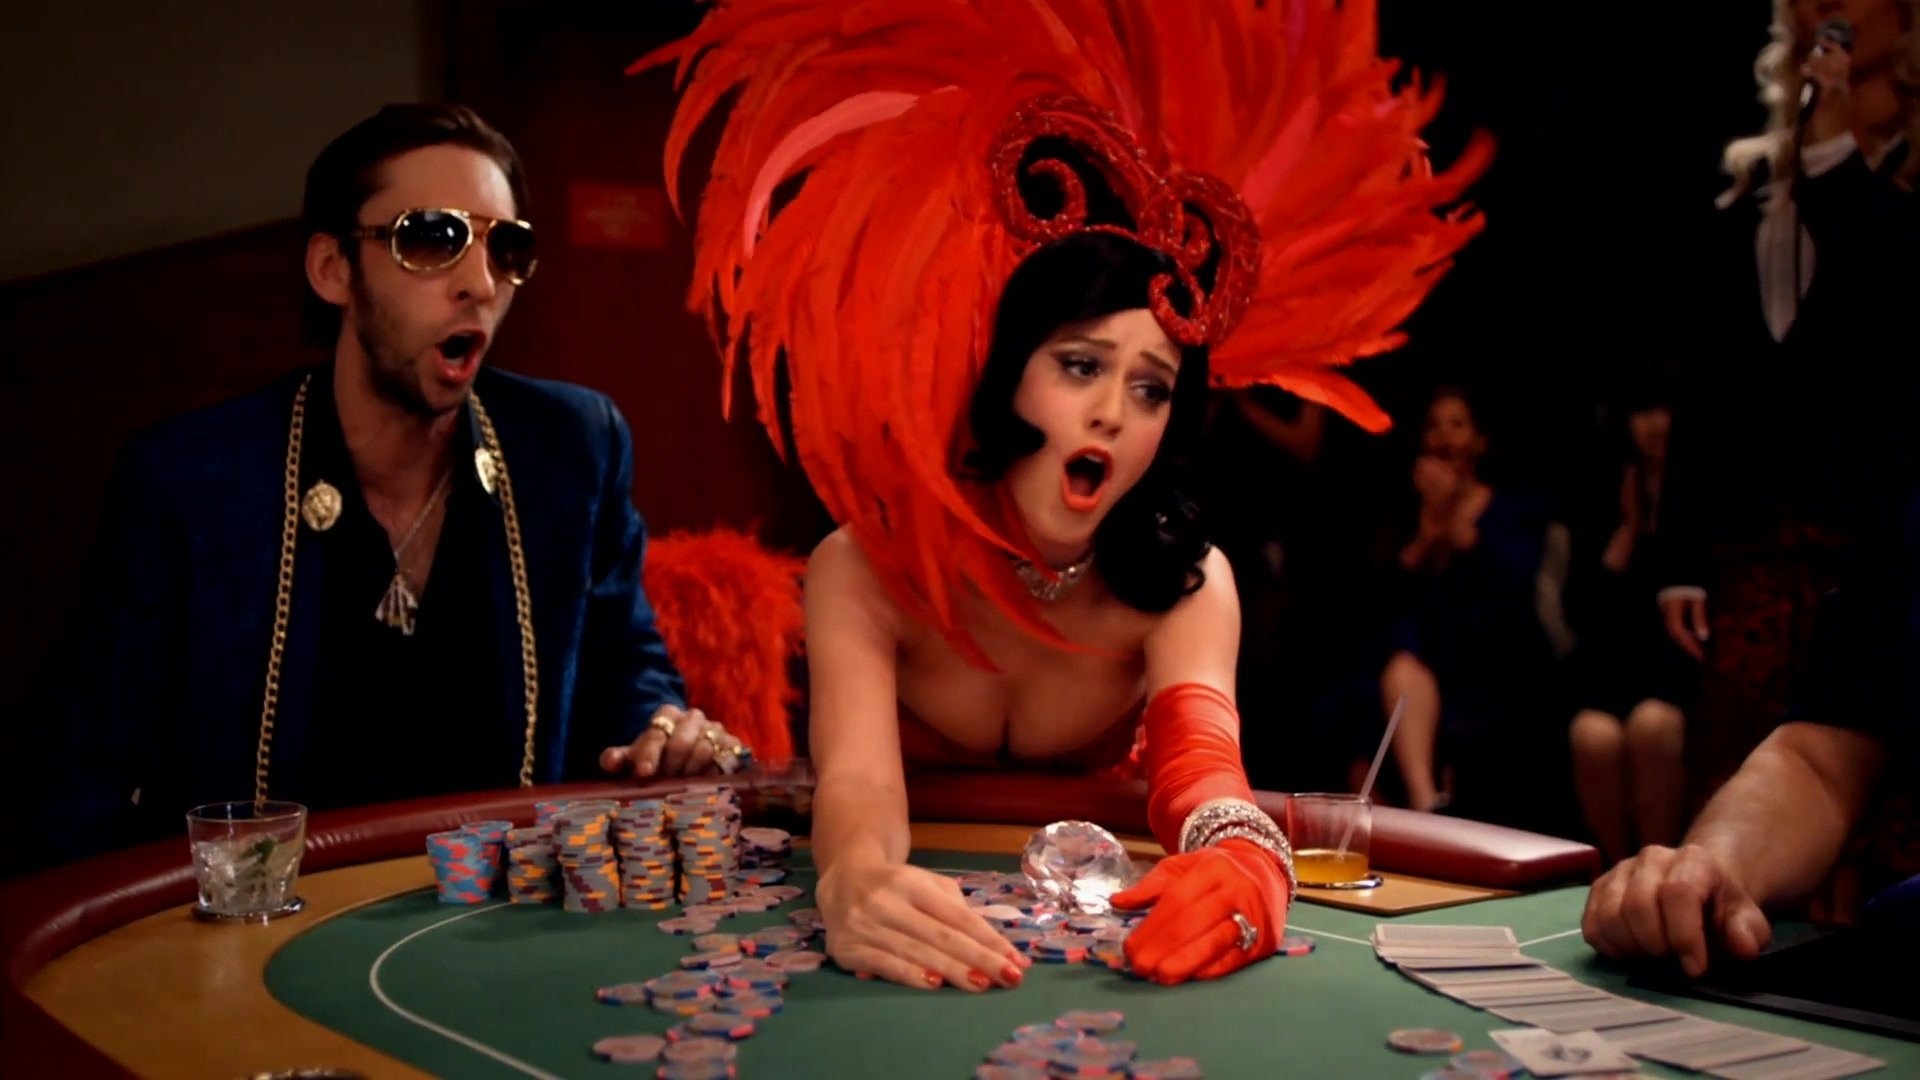 10 Songs to Make Your Gambling Experience Epic - Casino.org Blog